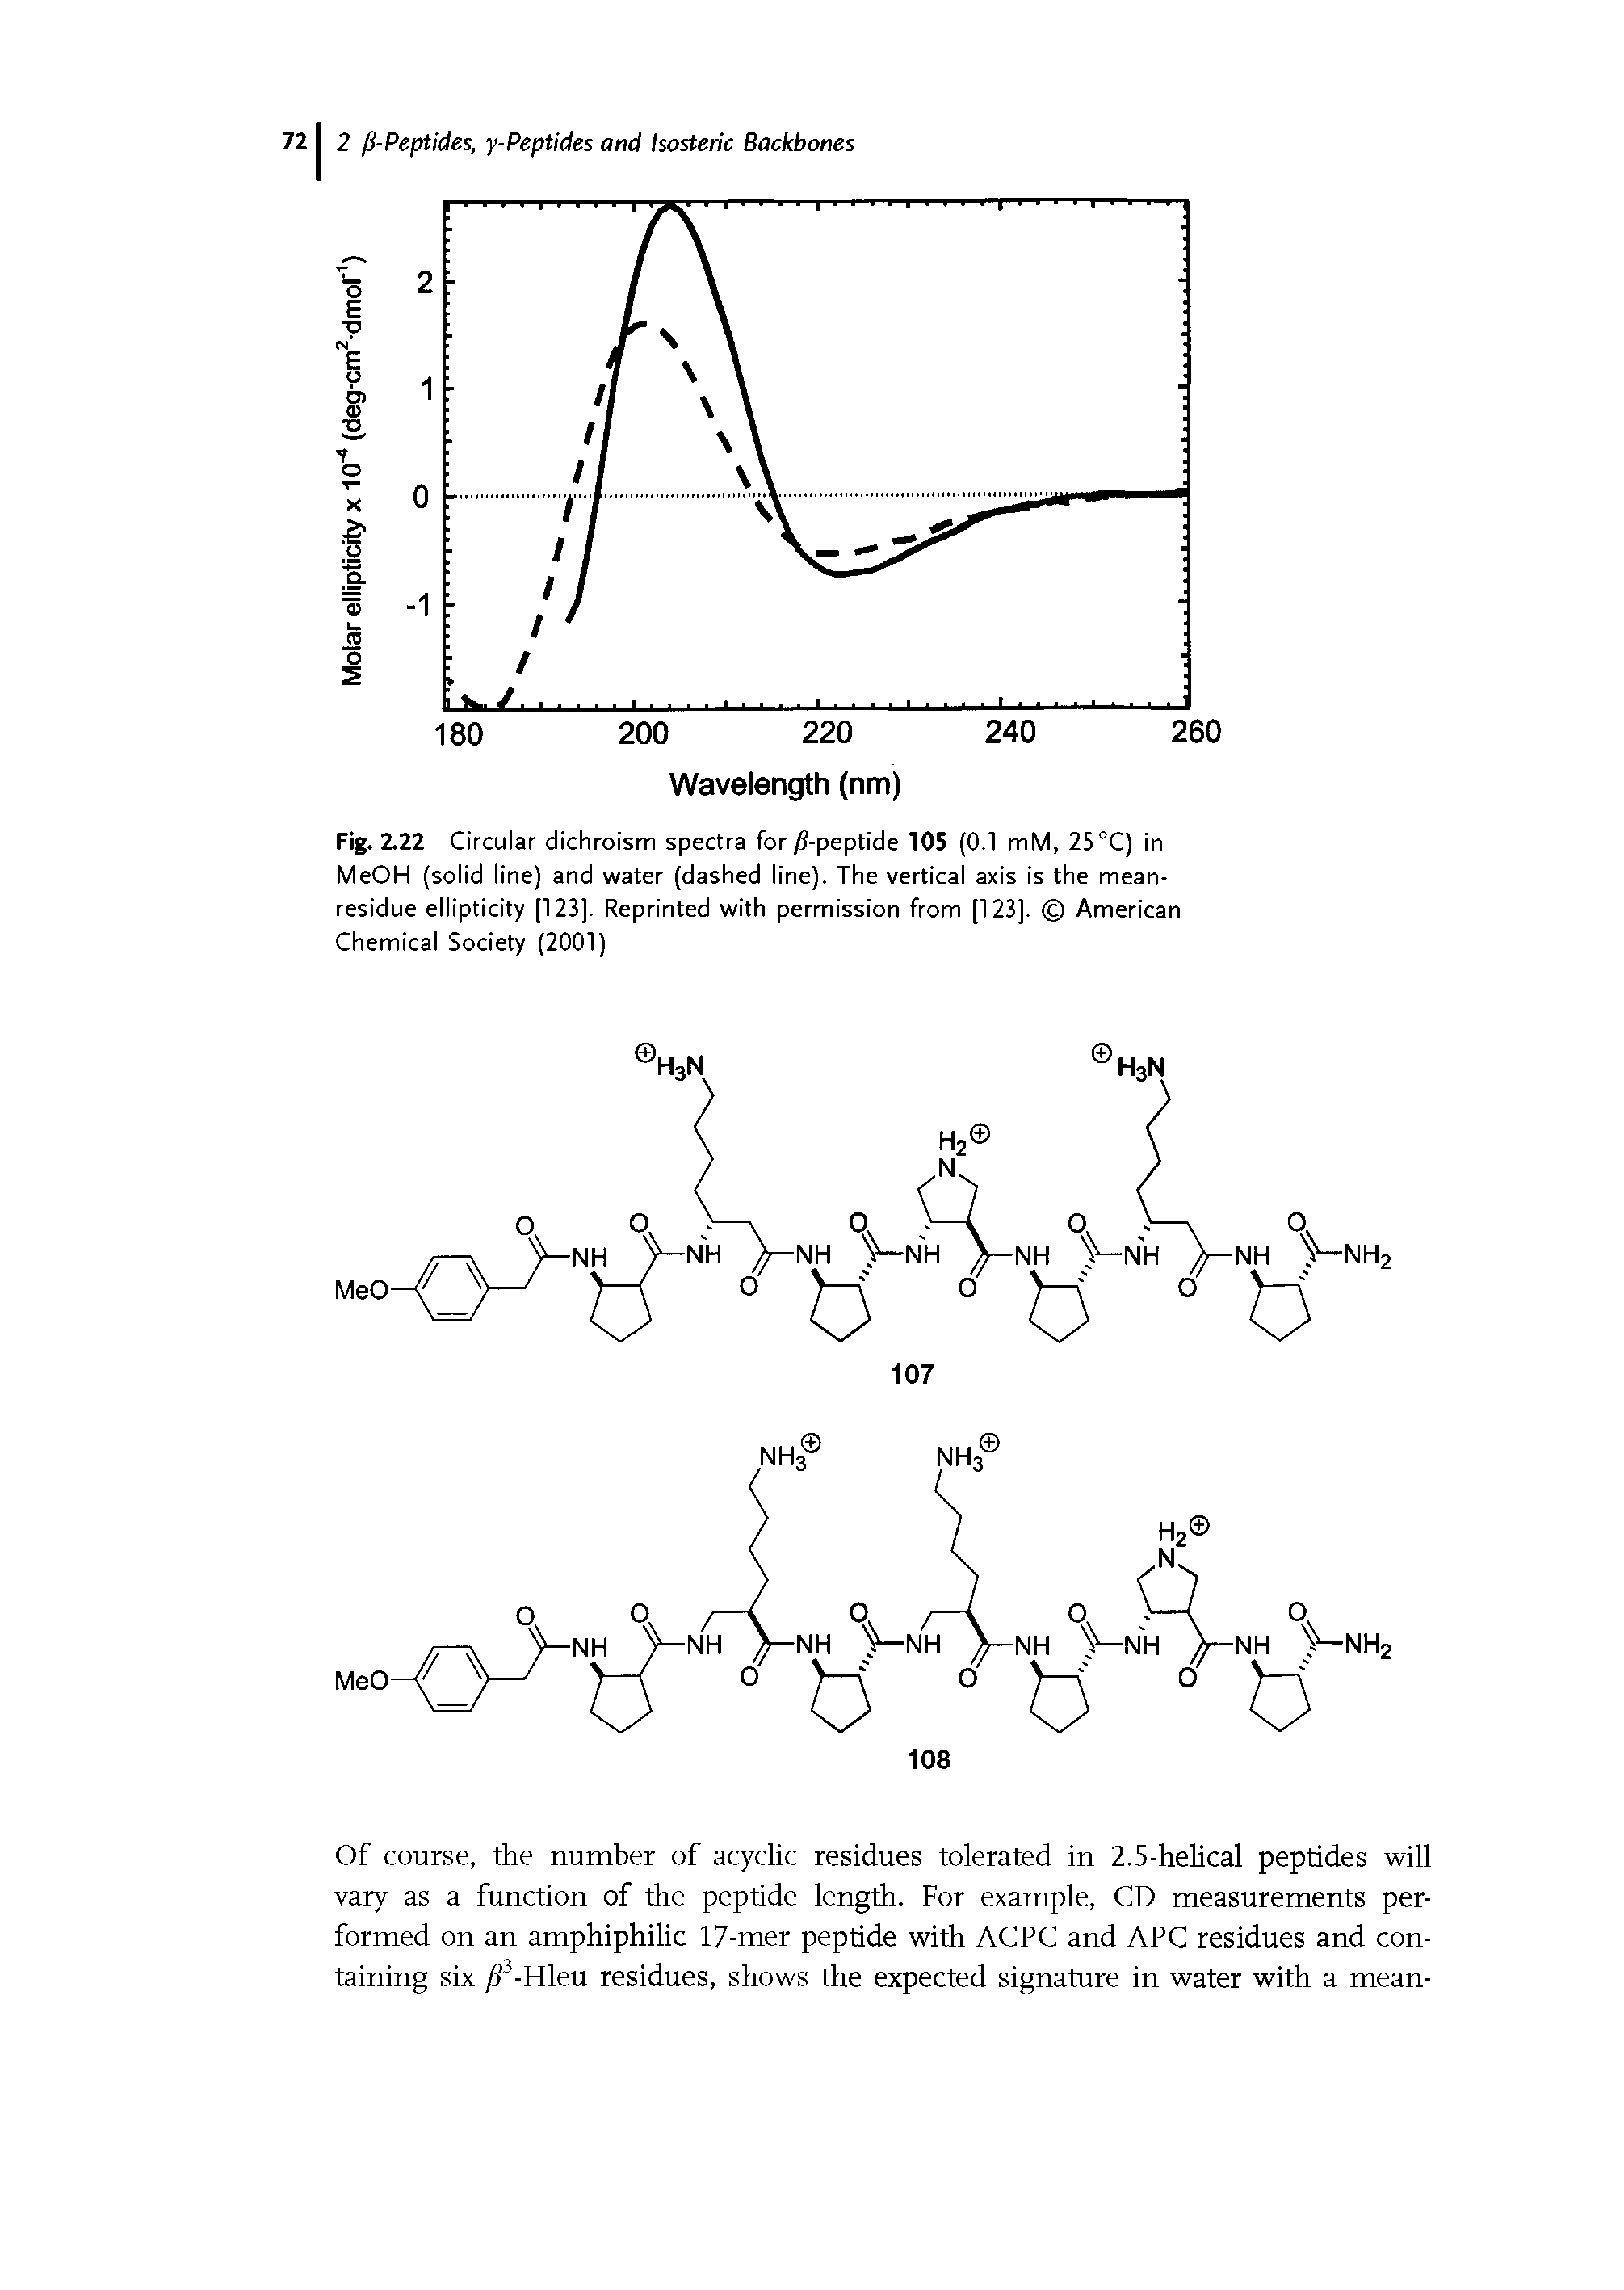 Fig. 2.22 Circular dichroism spectra for/ -peptide 105 (0.1 mM, 25°C) in MeOH (solid line) and water (dashed line). The vertical axis is the mean-residue ellipticity [123]. Reprinted with permission from [123]. American Chemical Society (2001)...